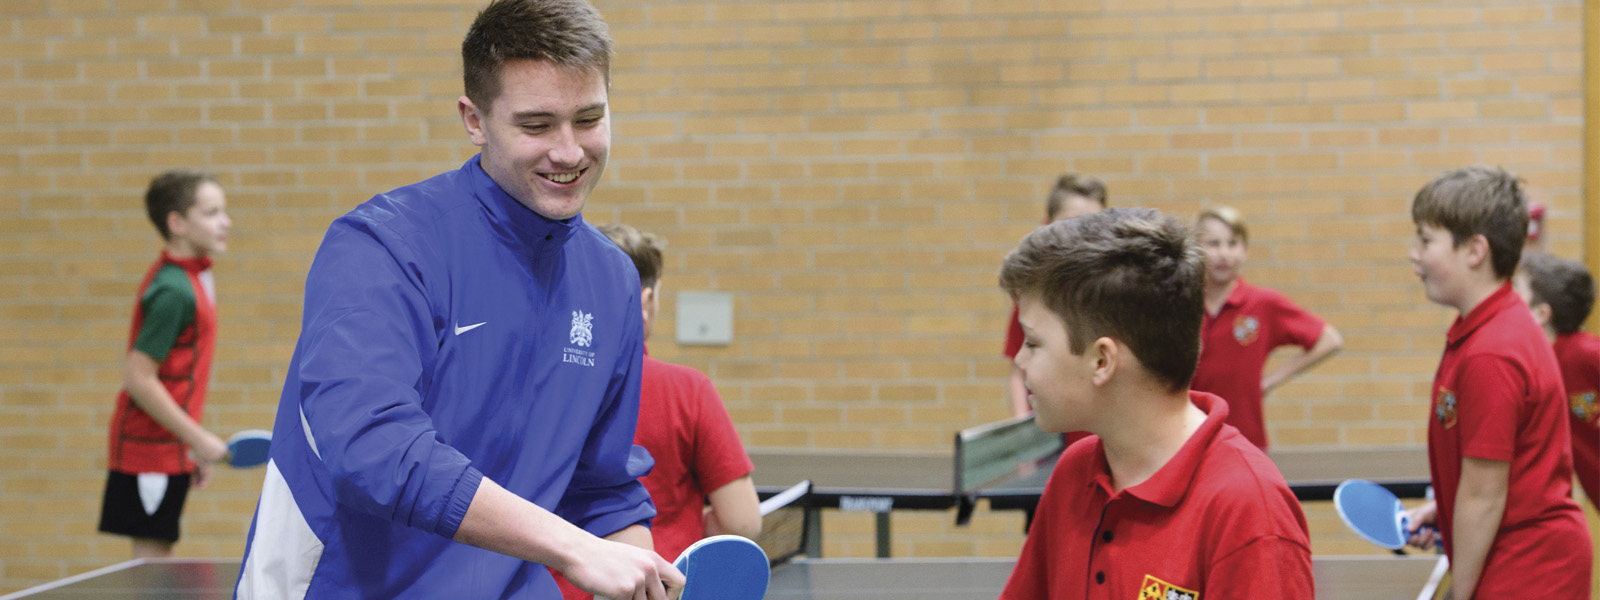 Sports teacher with children playing table tennis